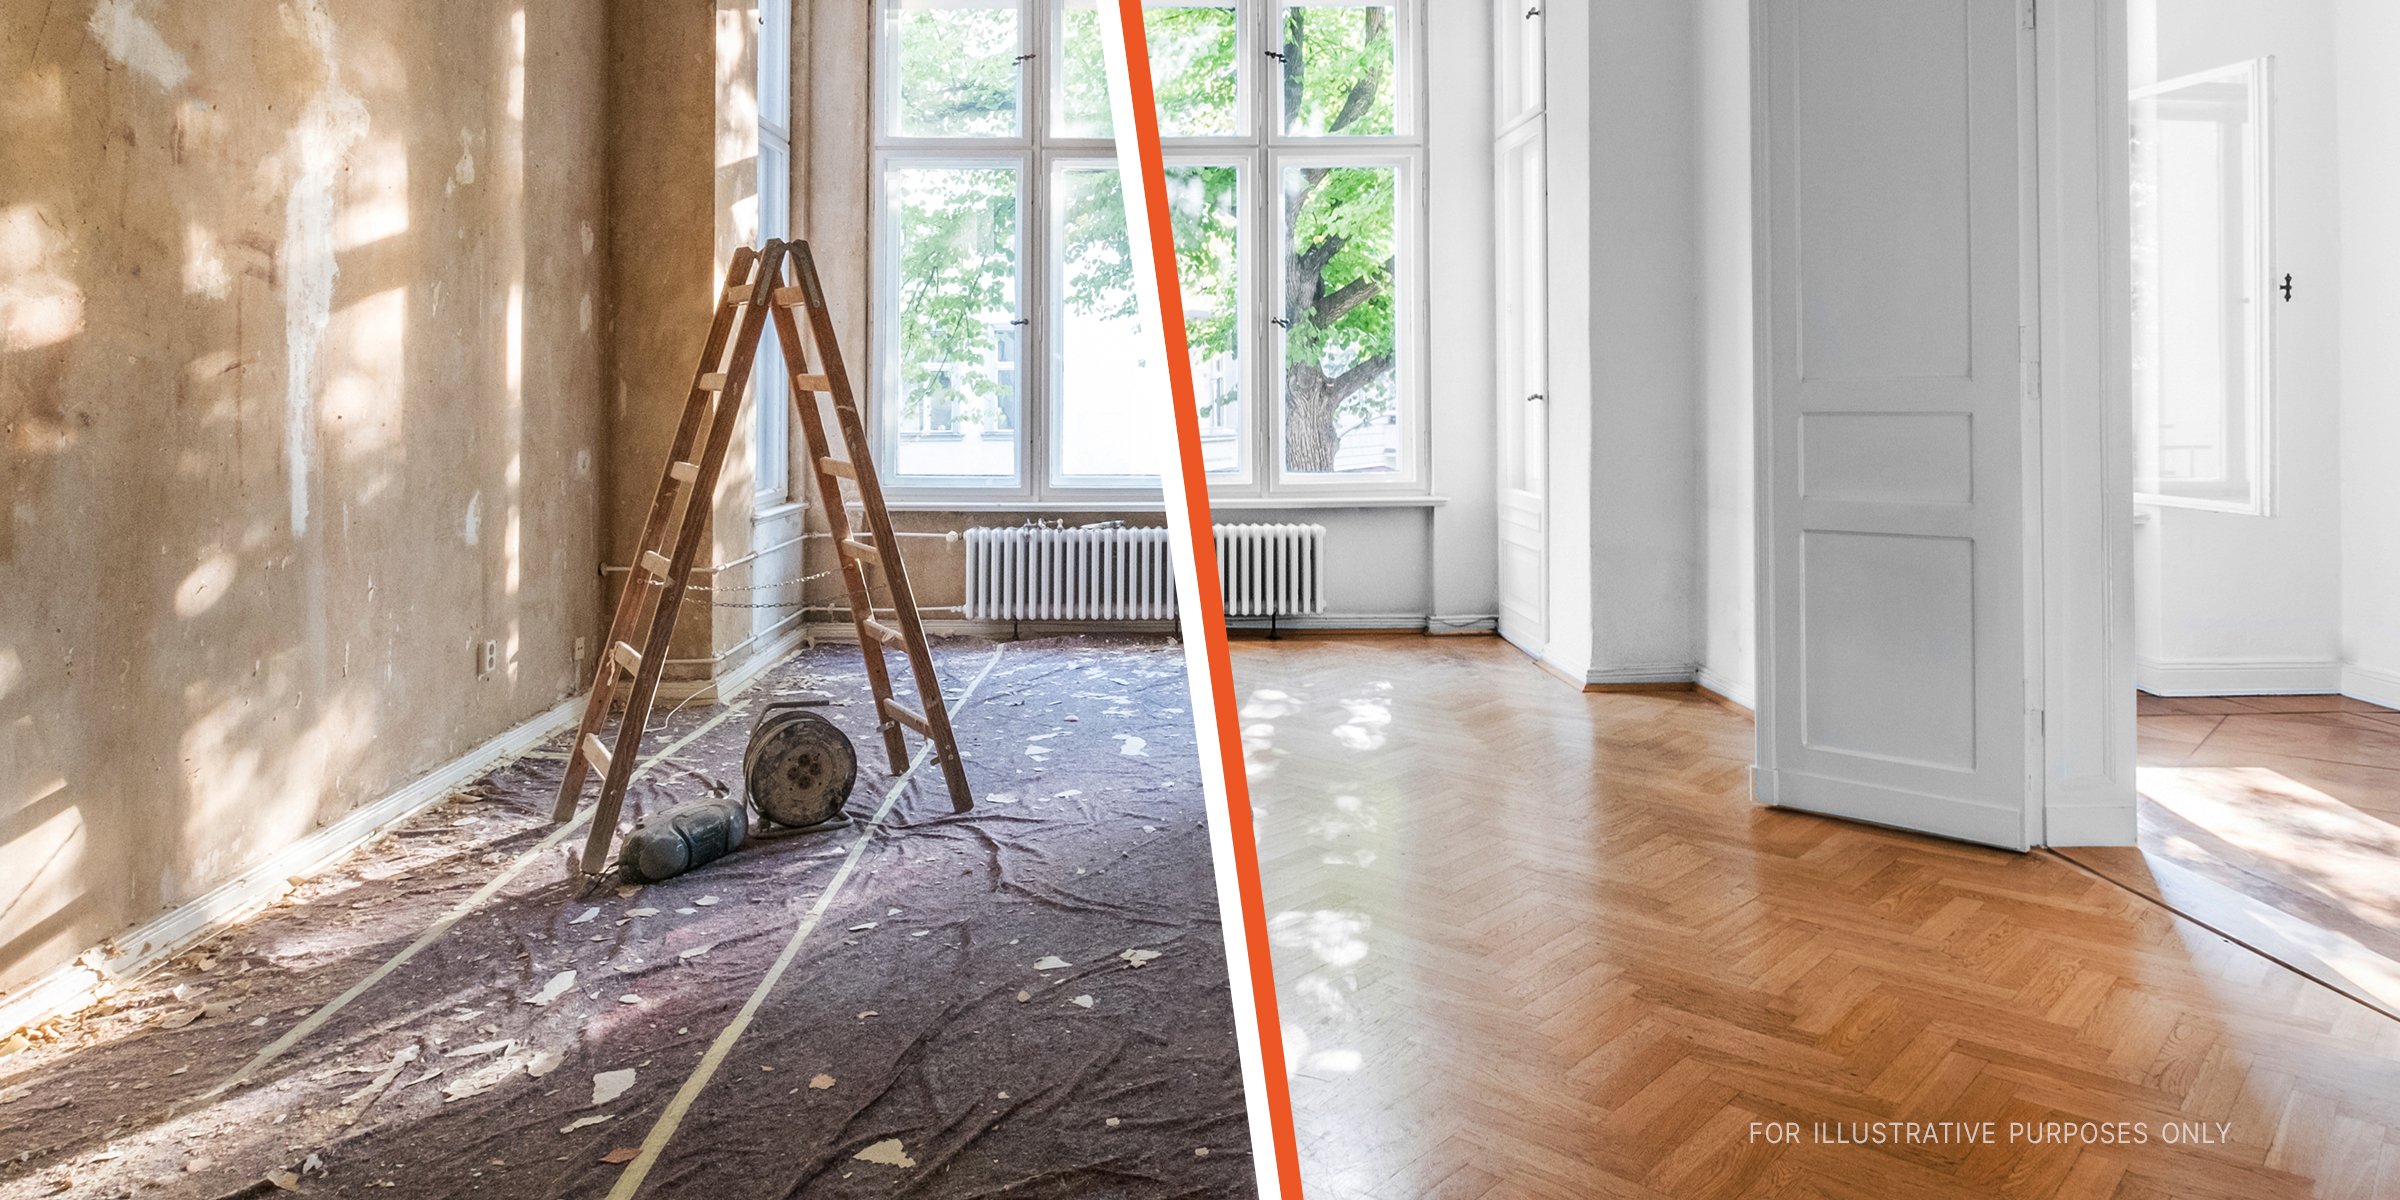 House before and after renovation | Source: Shutterstock | Getty Images